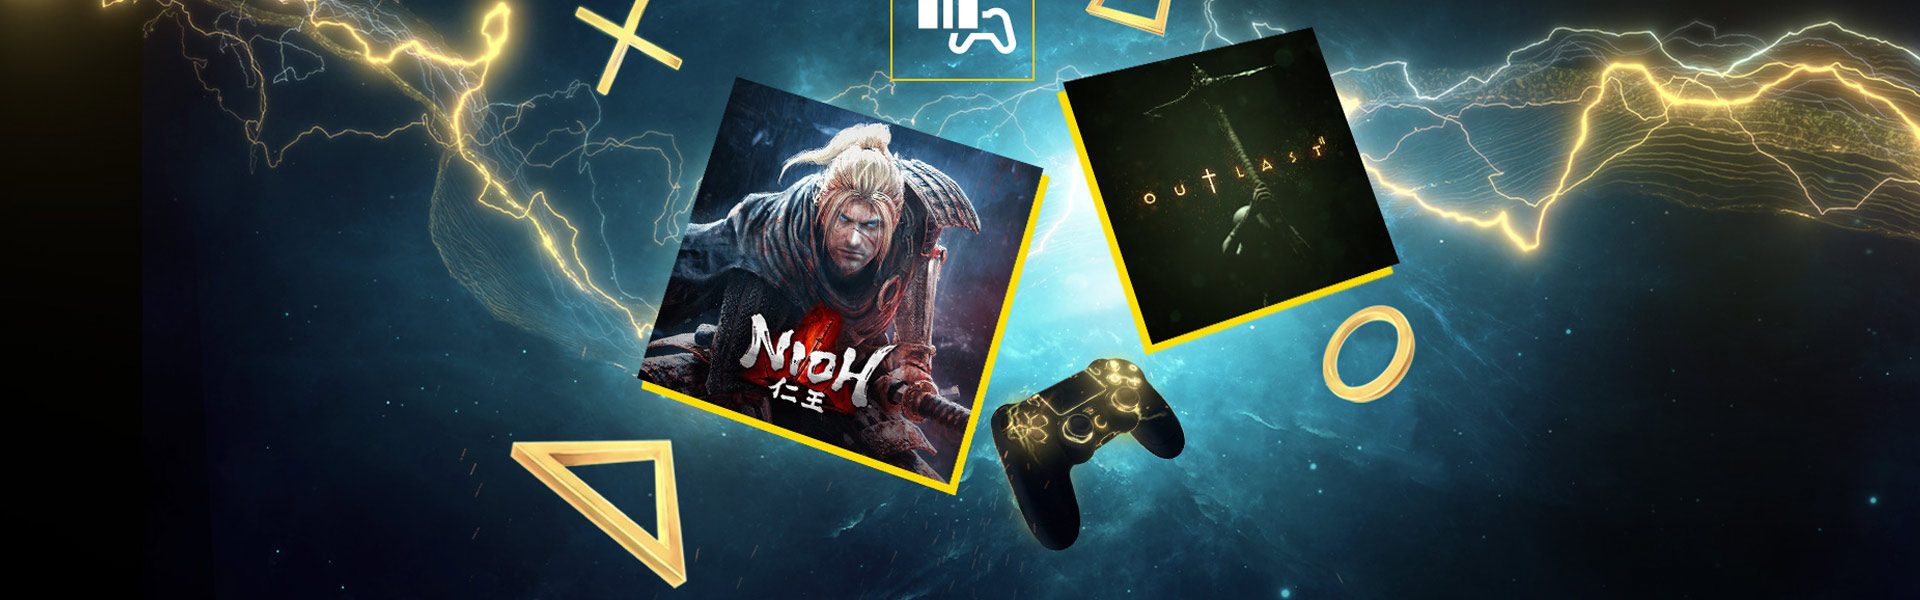 best free ps plus games ever